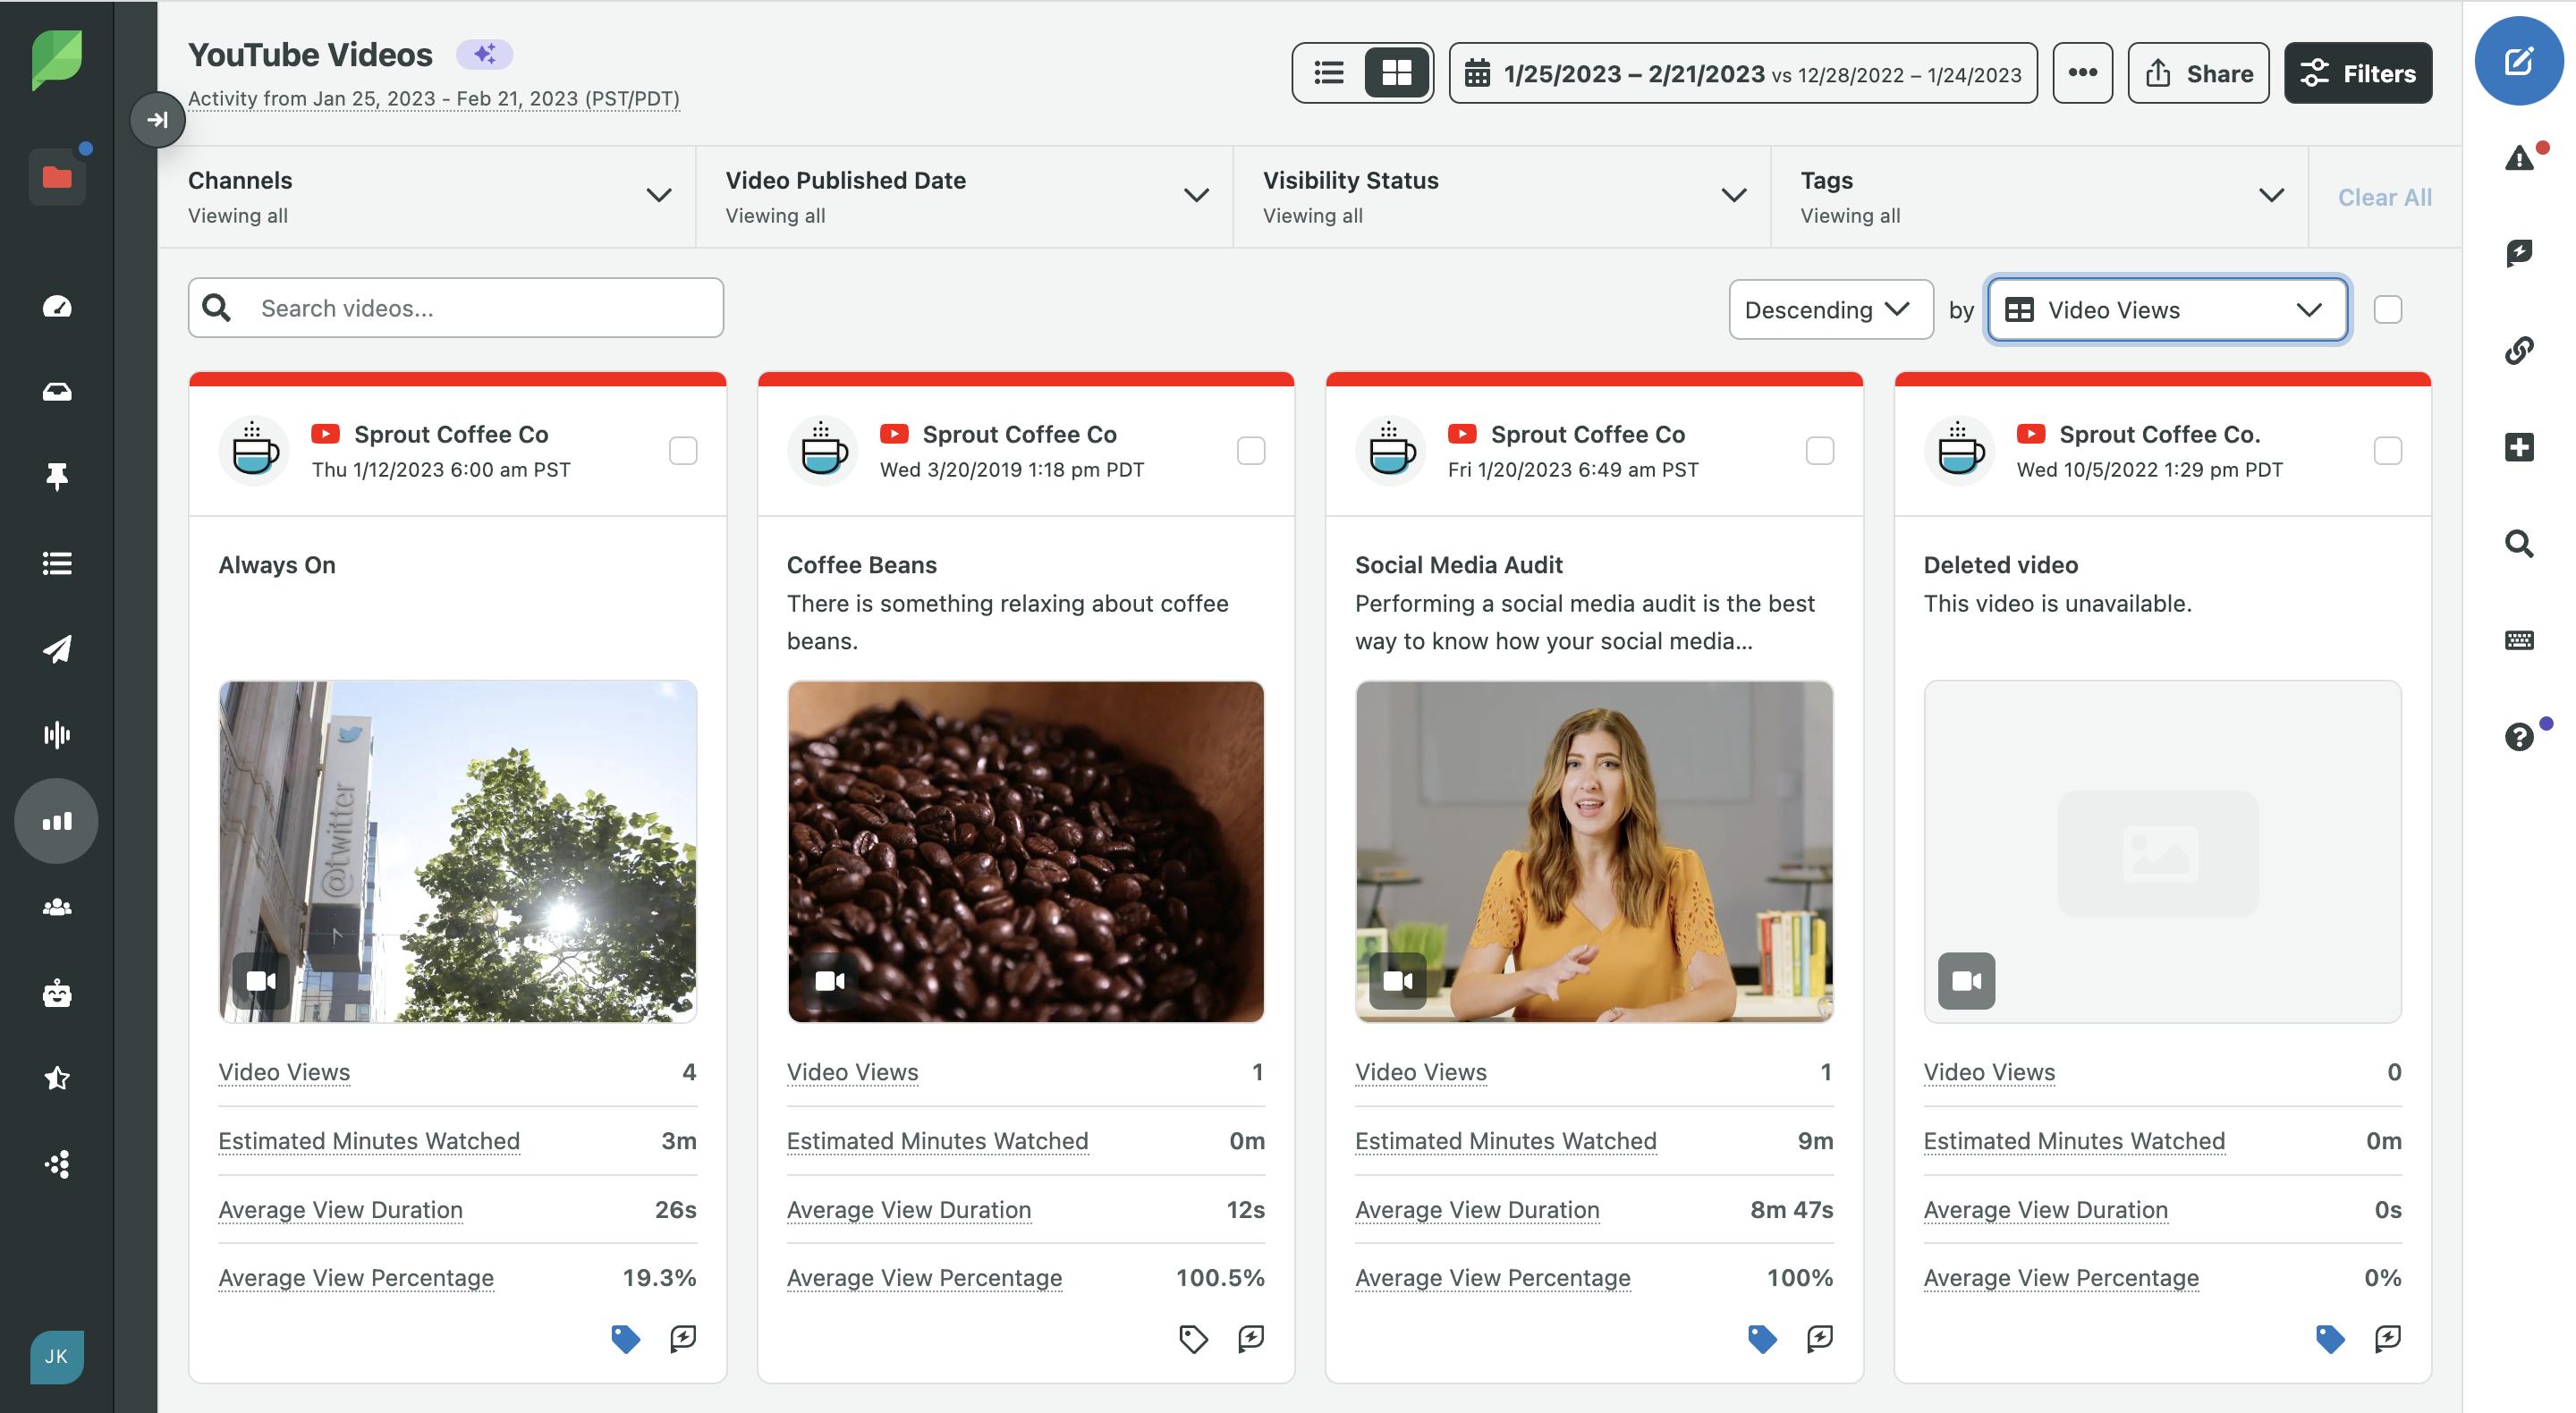 Sprout Social YouTube Videos dashboard